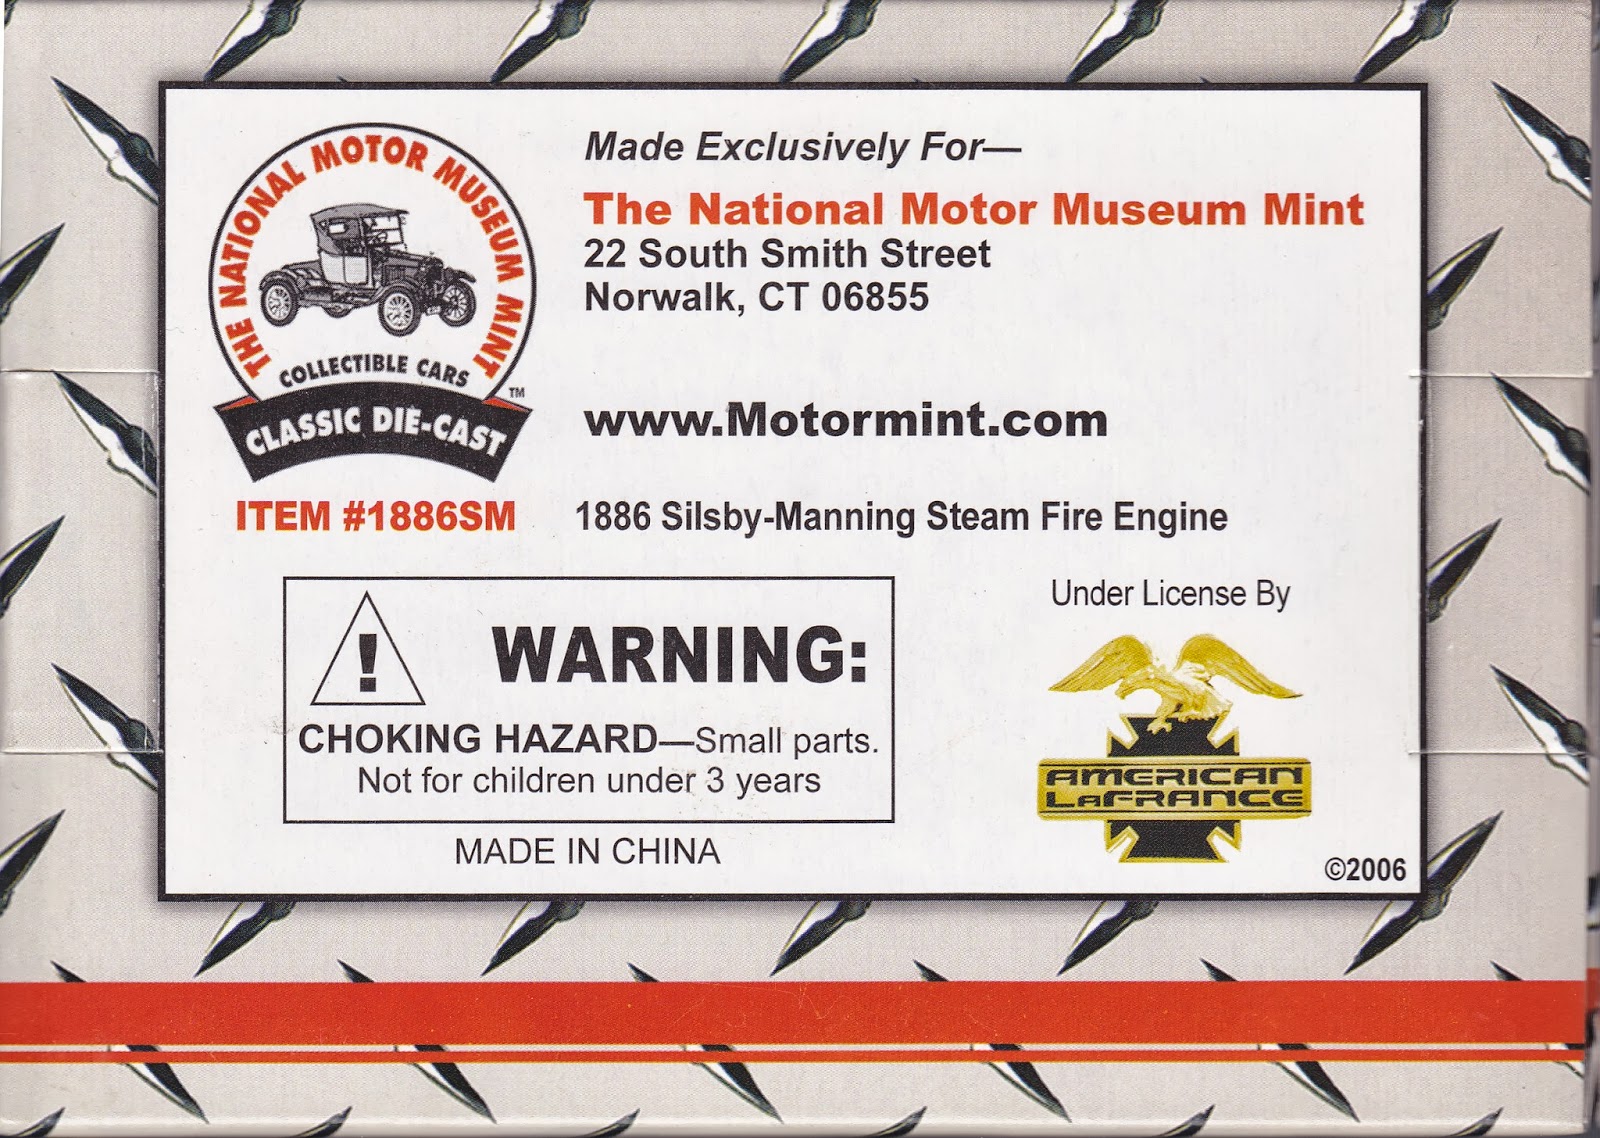 NMMM - National Motor Museum Mint